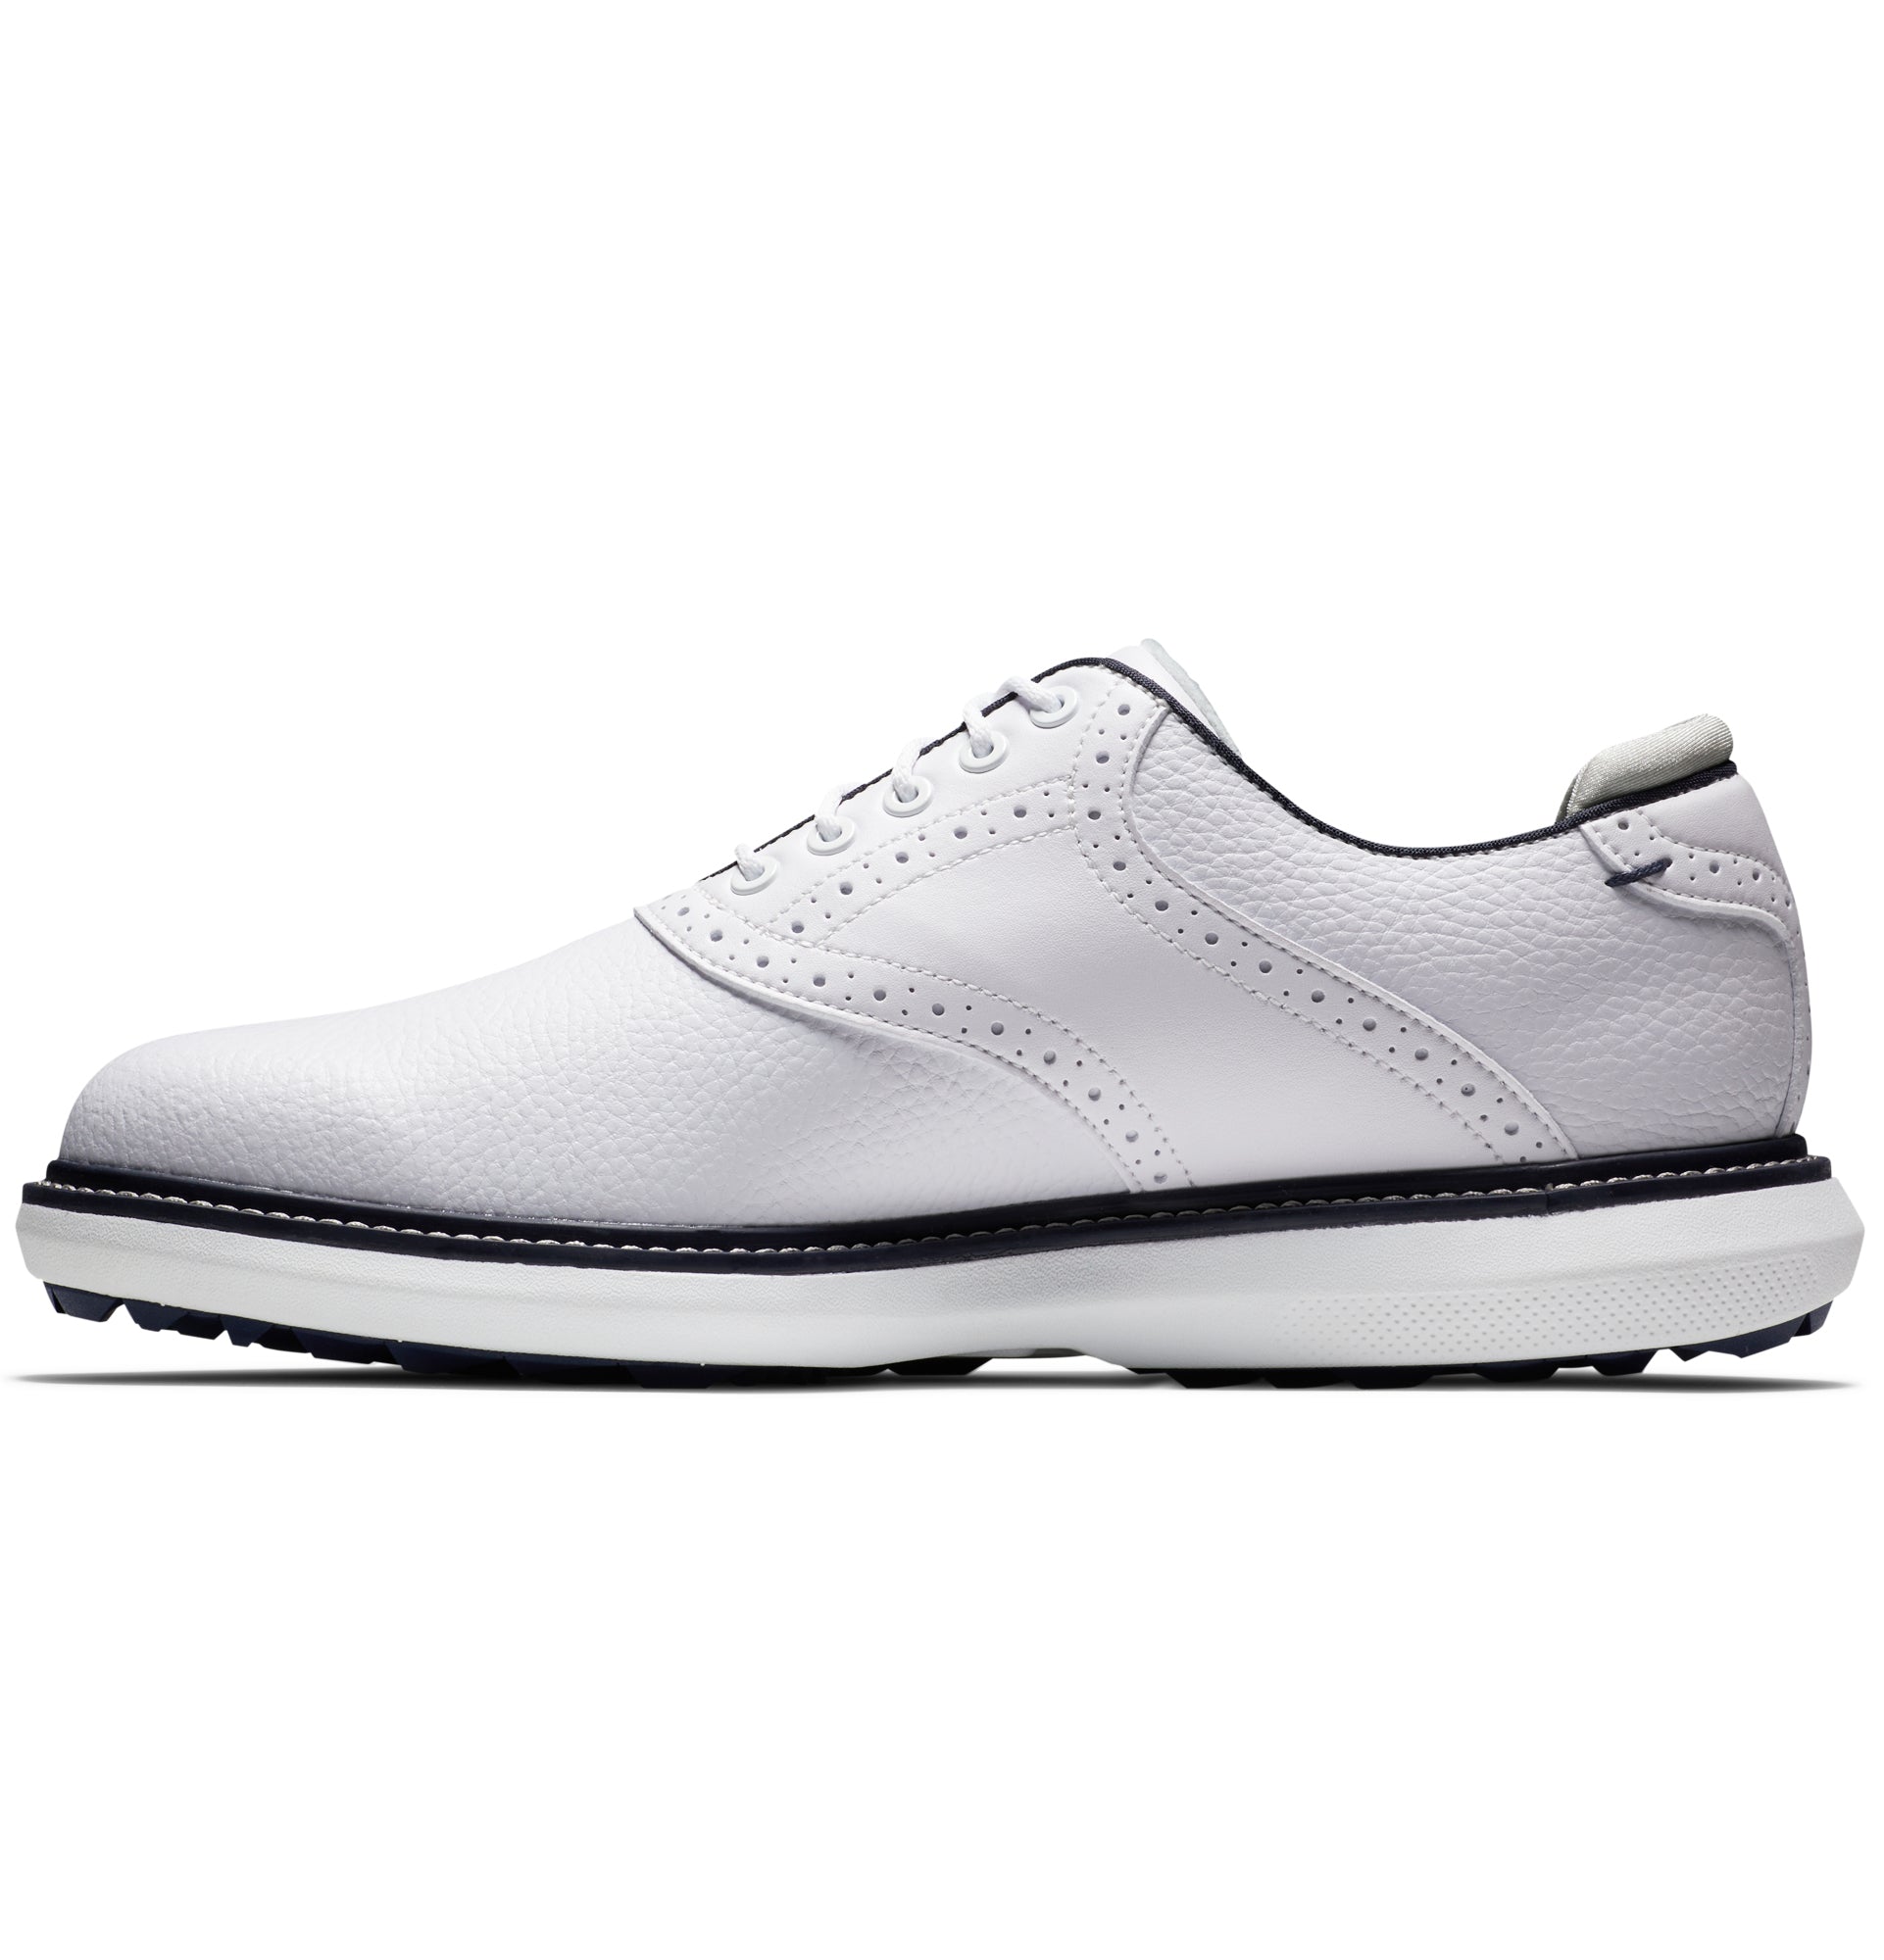 footjoy-fj-traditions-spikeless-golf-shoes-57927-white-navy